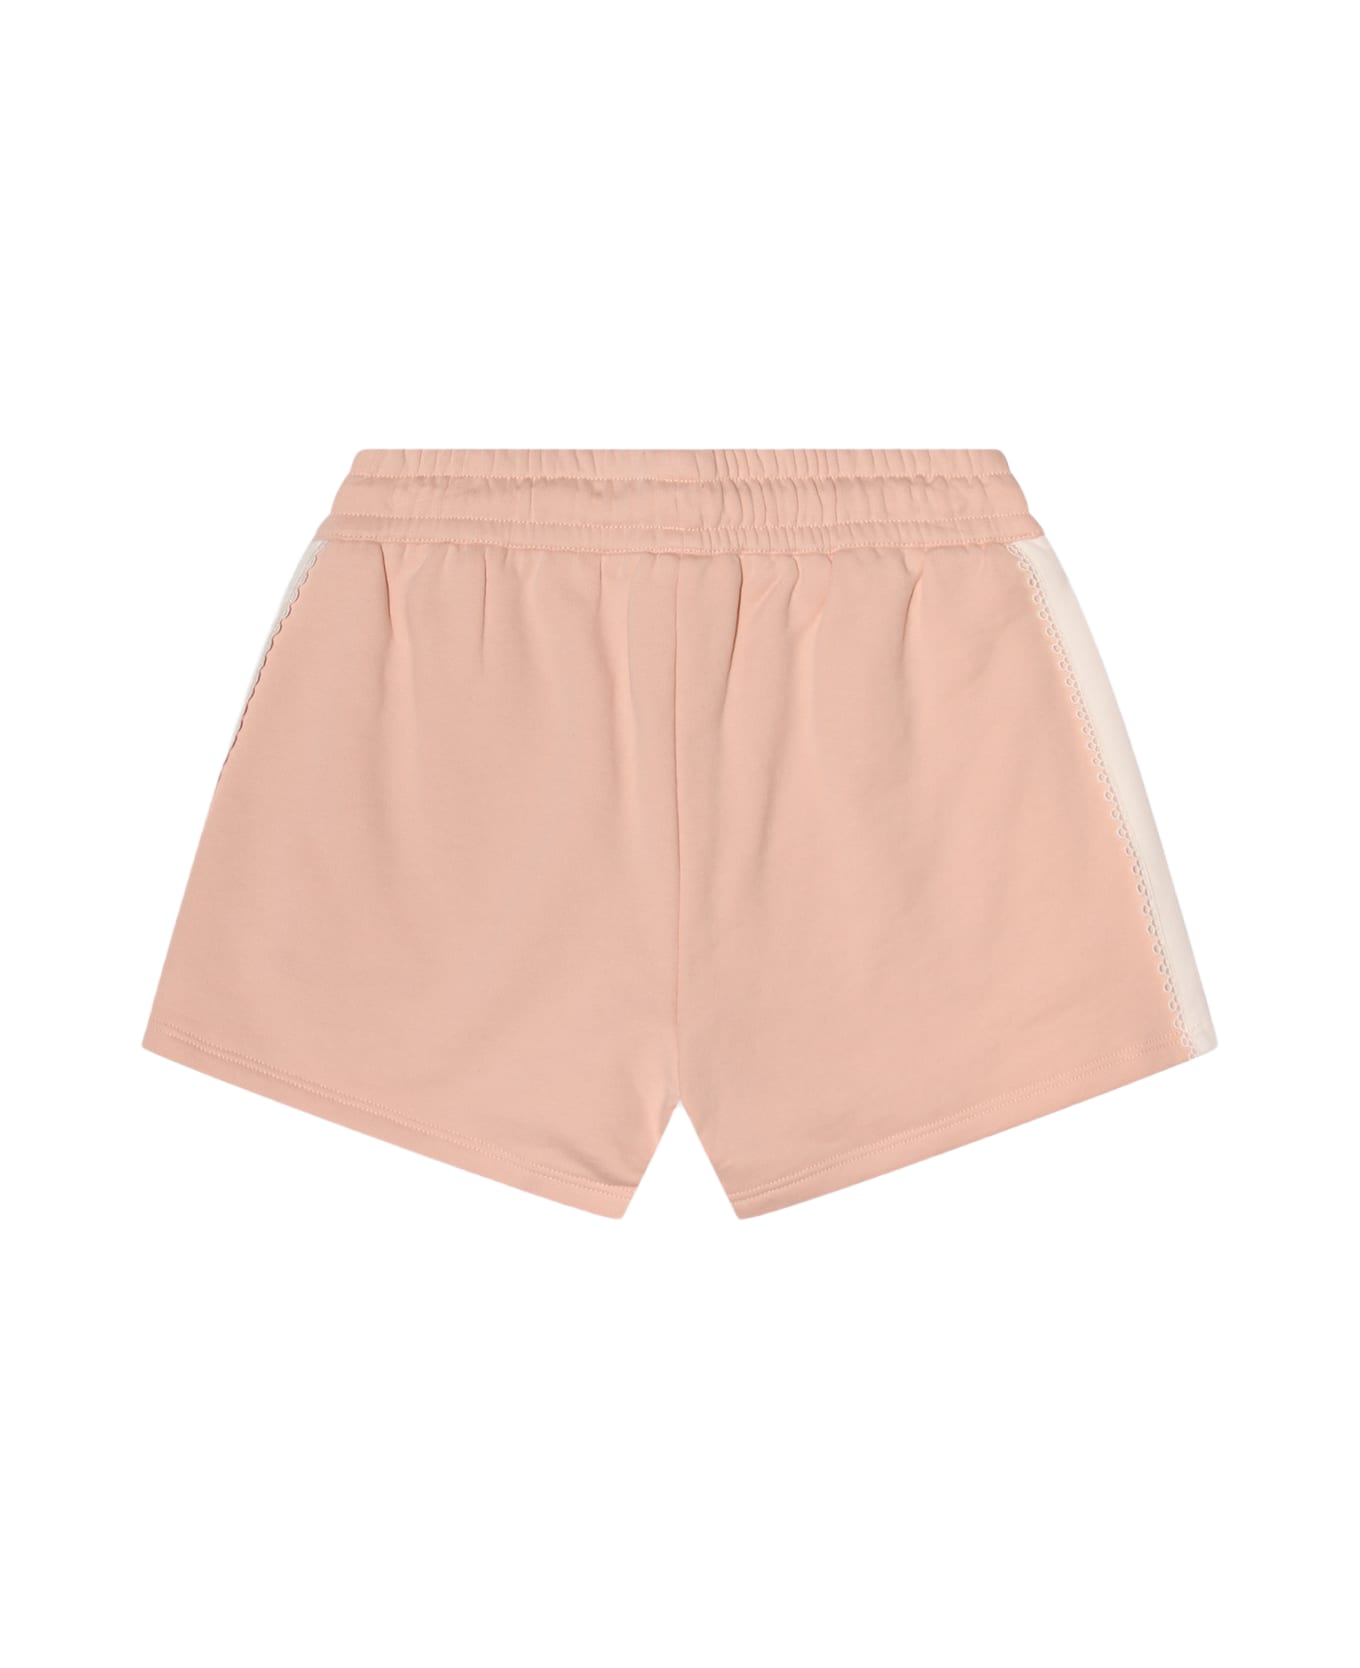 Chloé Washed Pink Cotton Shorts - WASHED PINK